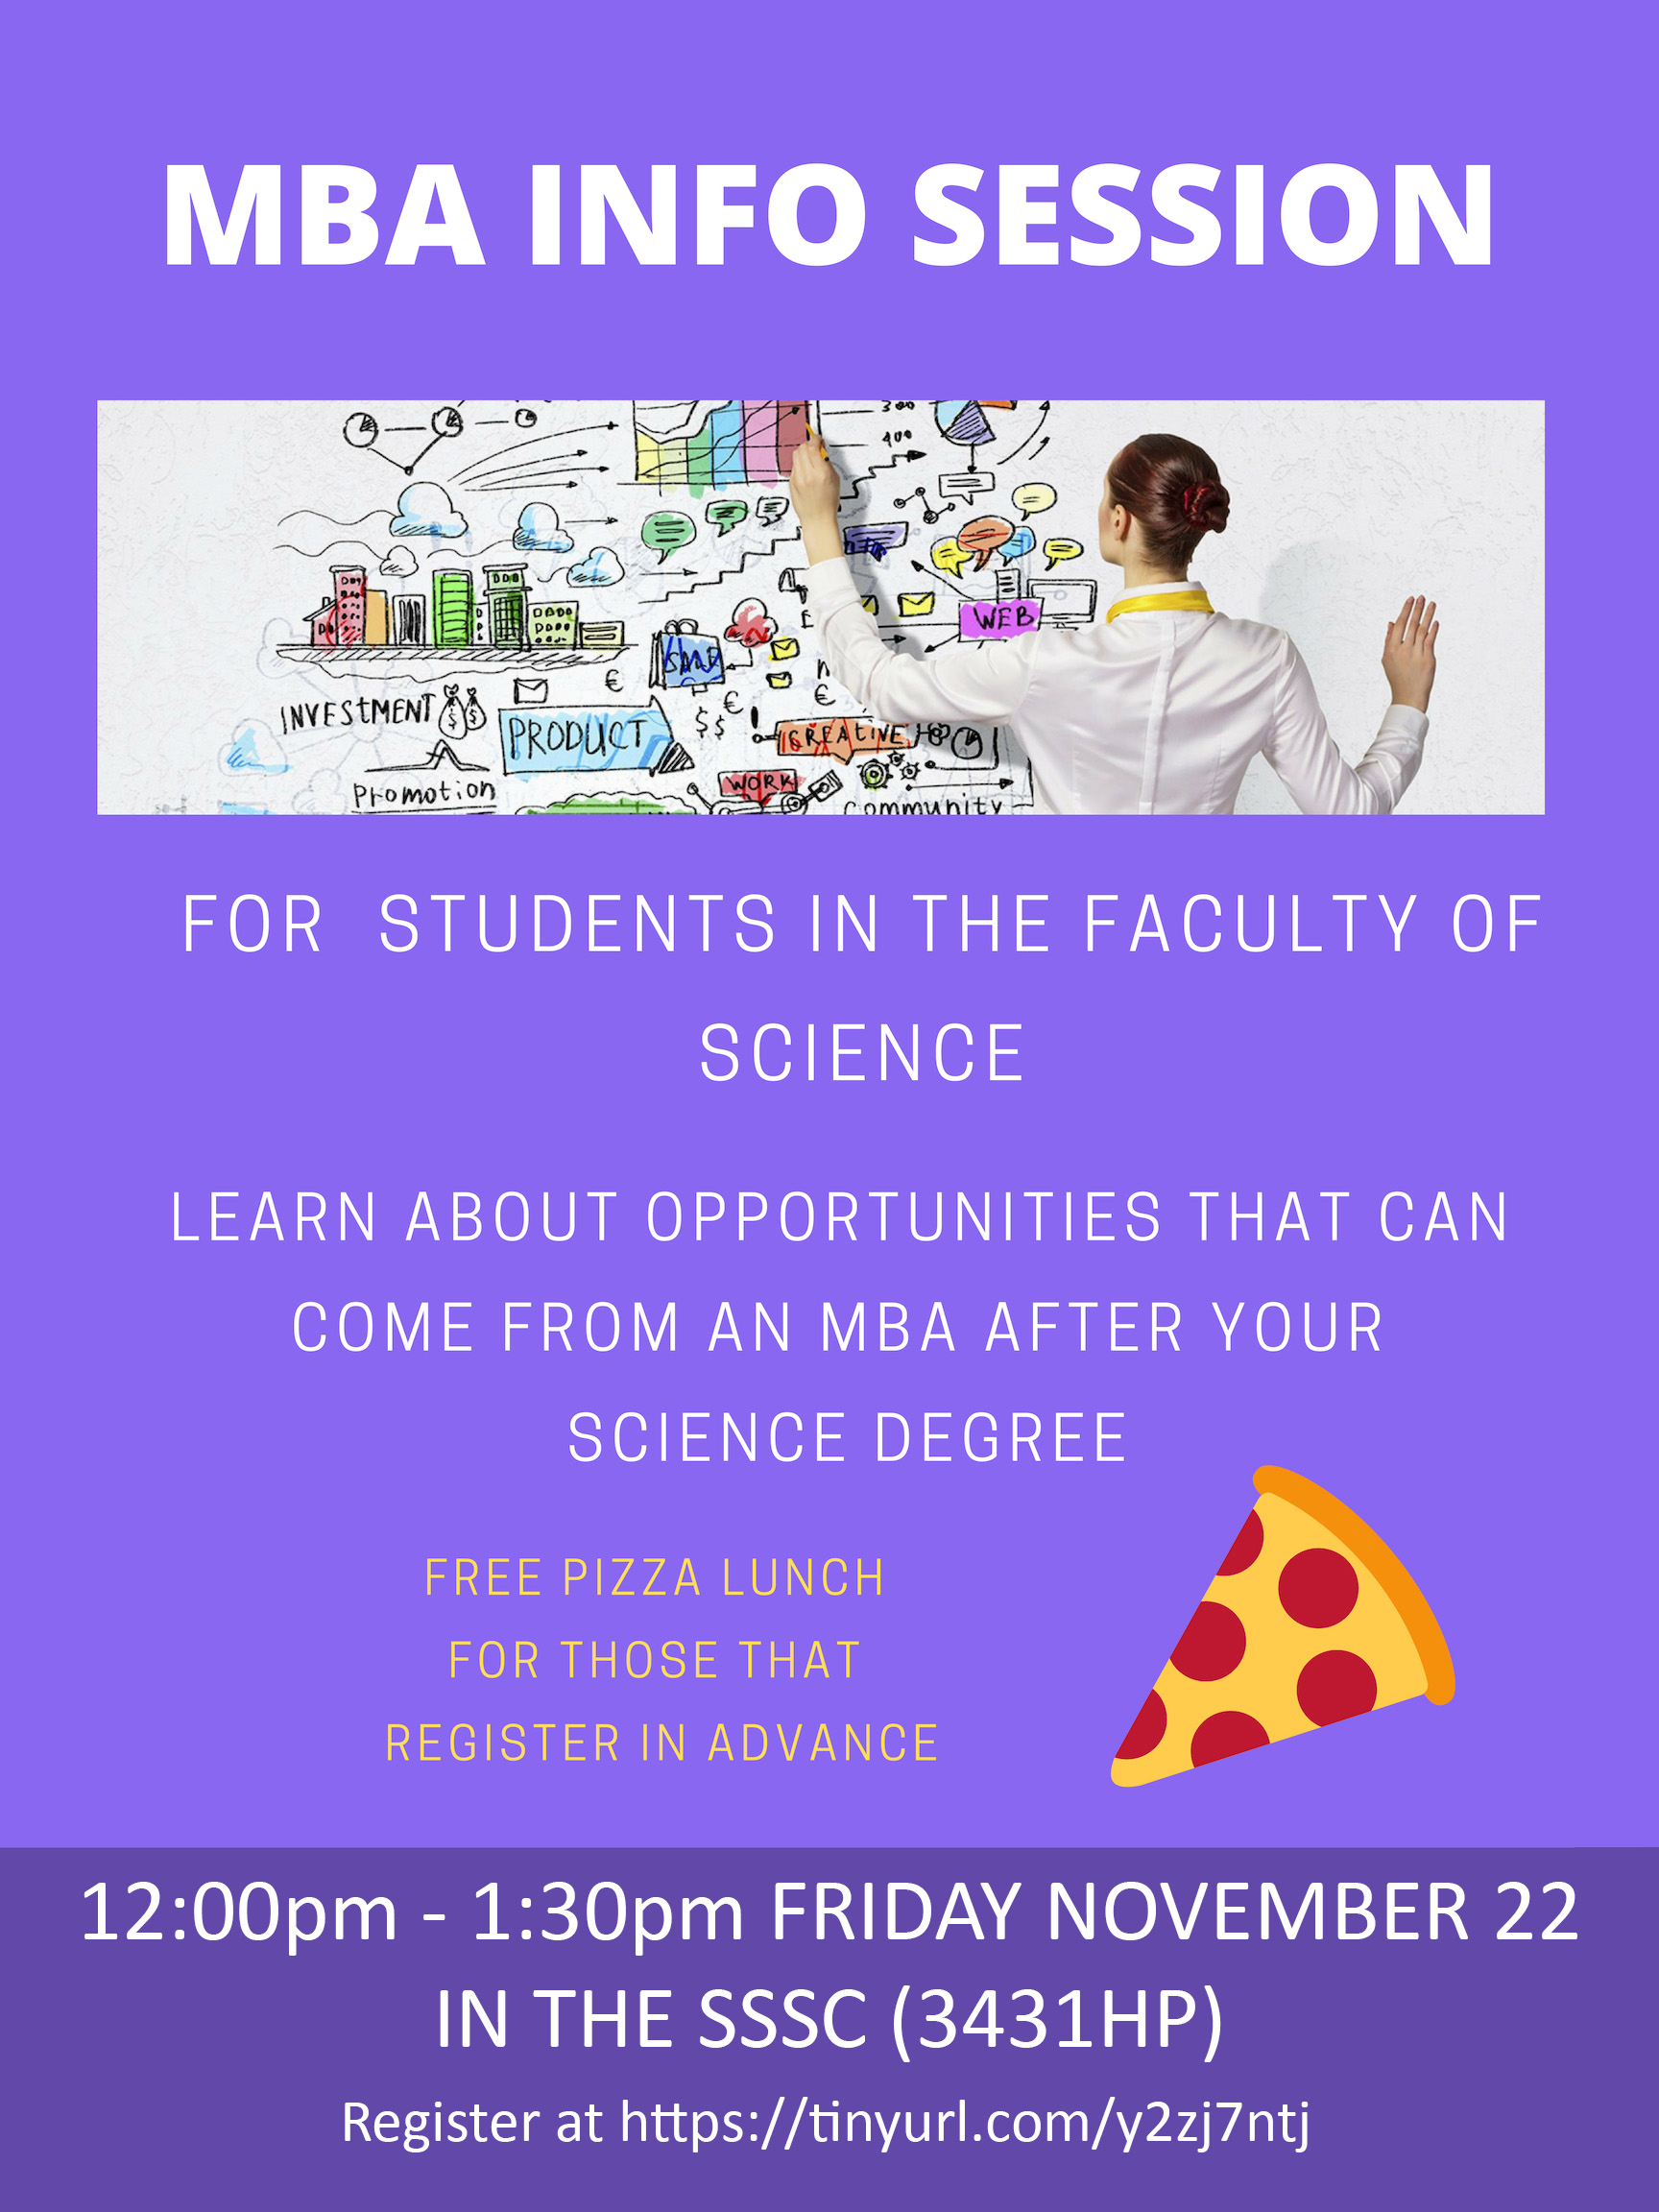 Poster for the MBA Info Session on November 22nd at 12pm 